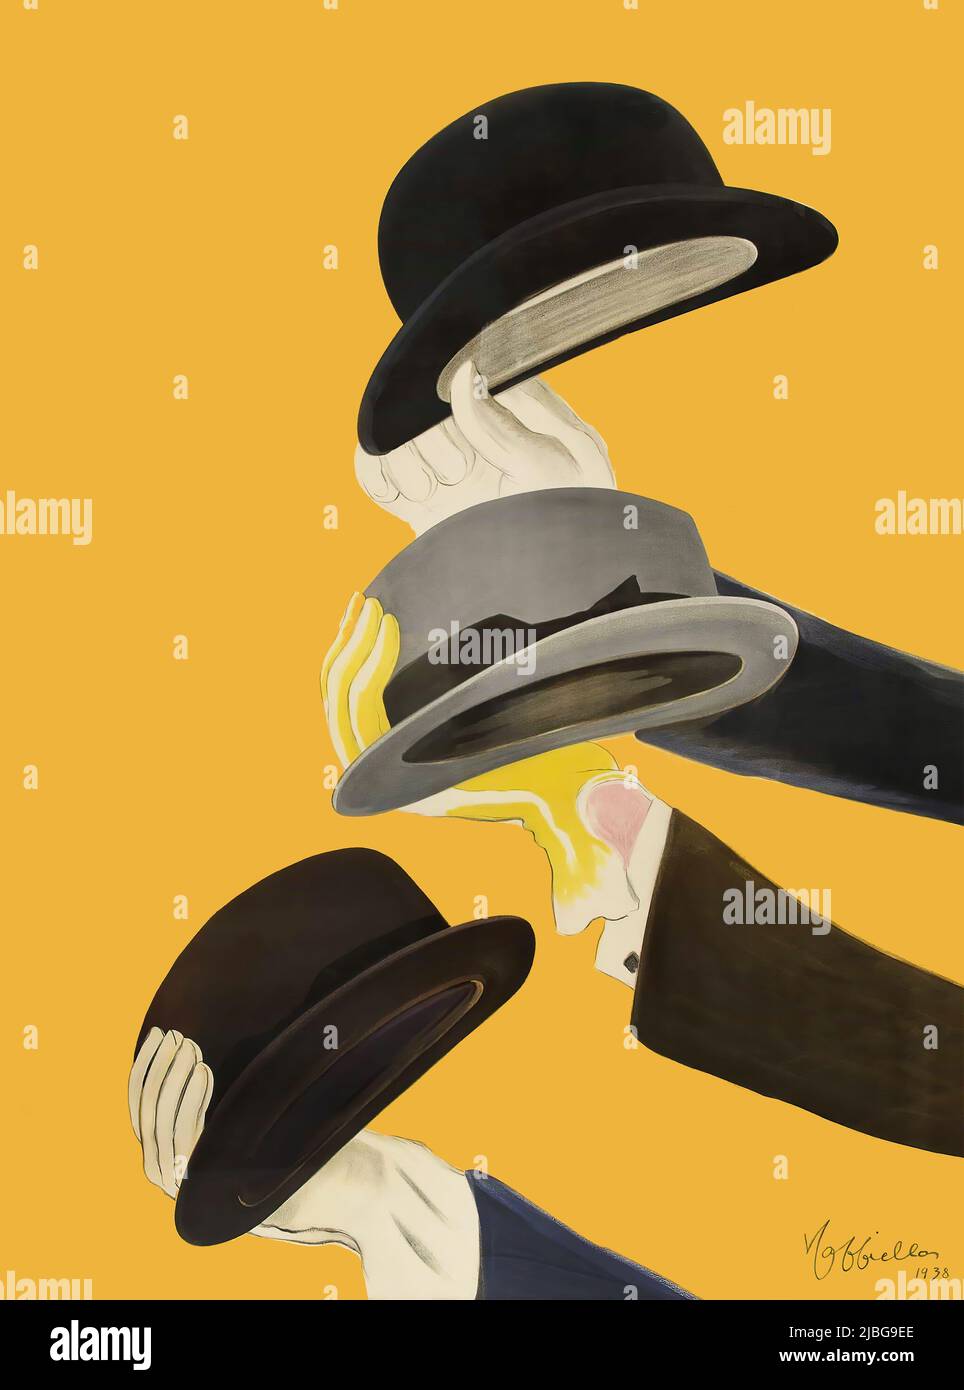 A detail from a turn of the 20th century, French advertising poster by Leonetto Cappiello (1875-1942), featuring the waved hats (good morning) of three gentlemen. Originally designed for Mossant, a famous brand of hat manufactured in France, the text details have been removed. The originally poster  with text can be seen at Alamy Image number 2JBG9CE Stock Photo